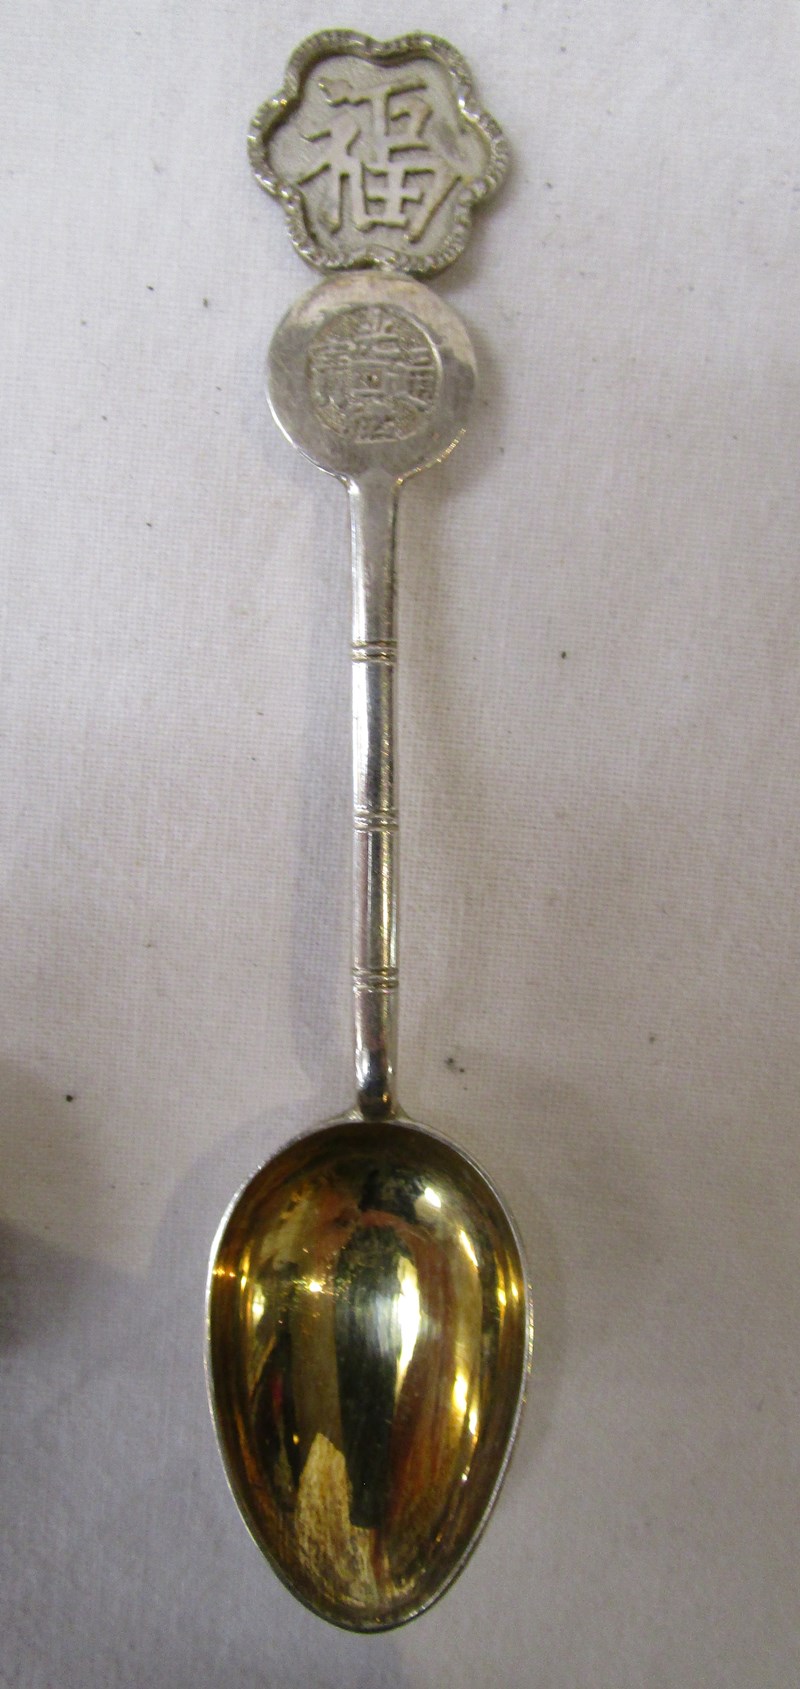 Boxed set of 12 Chinese export teaspoons - Wang Hing - 900 silver - Image 4 of 5